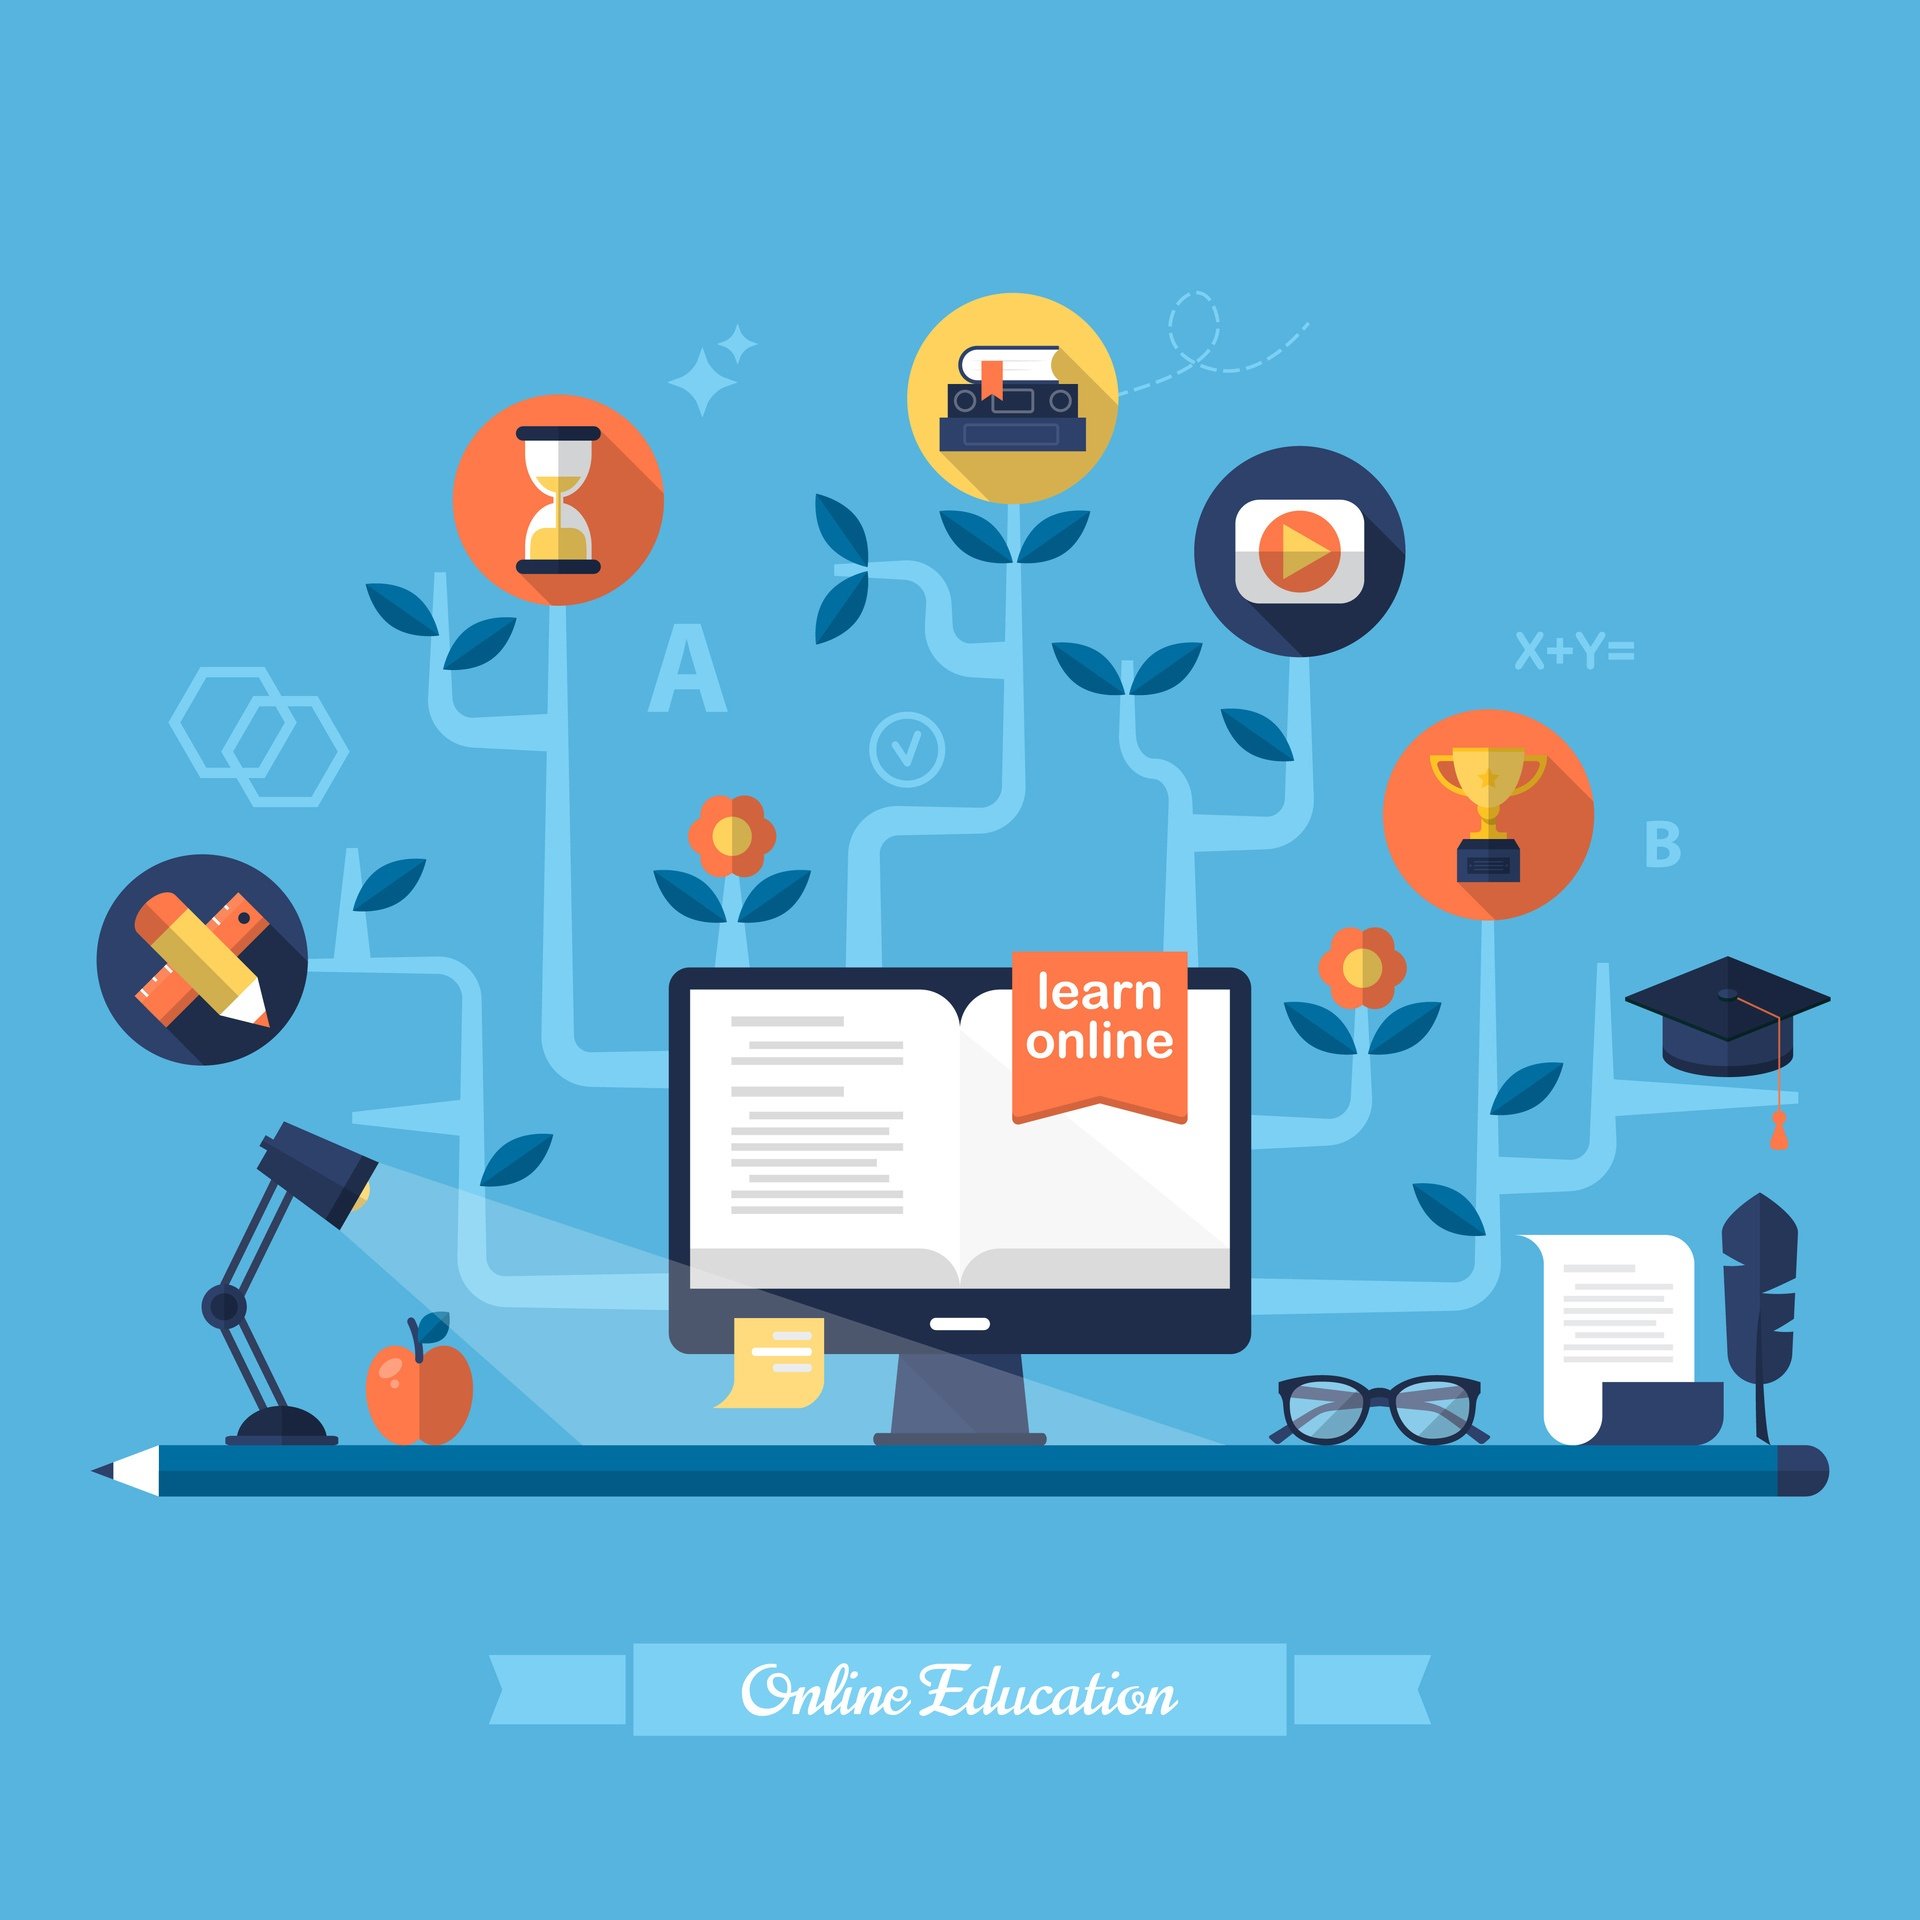 Online Learning Advantages Why Online Learning Offers Plenty Of